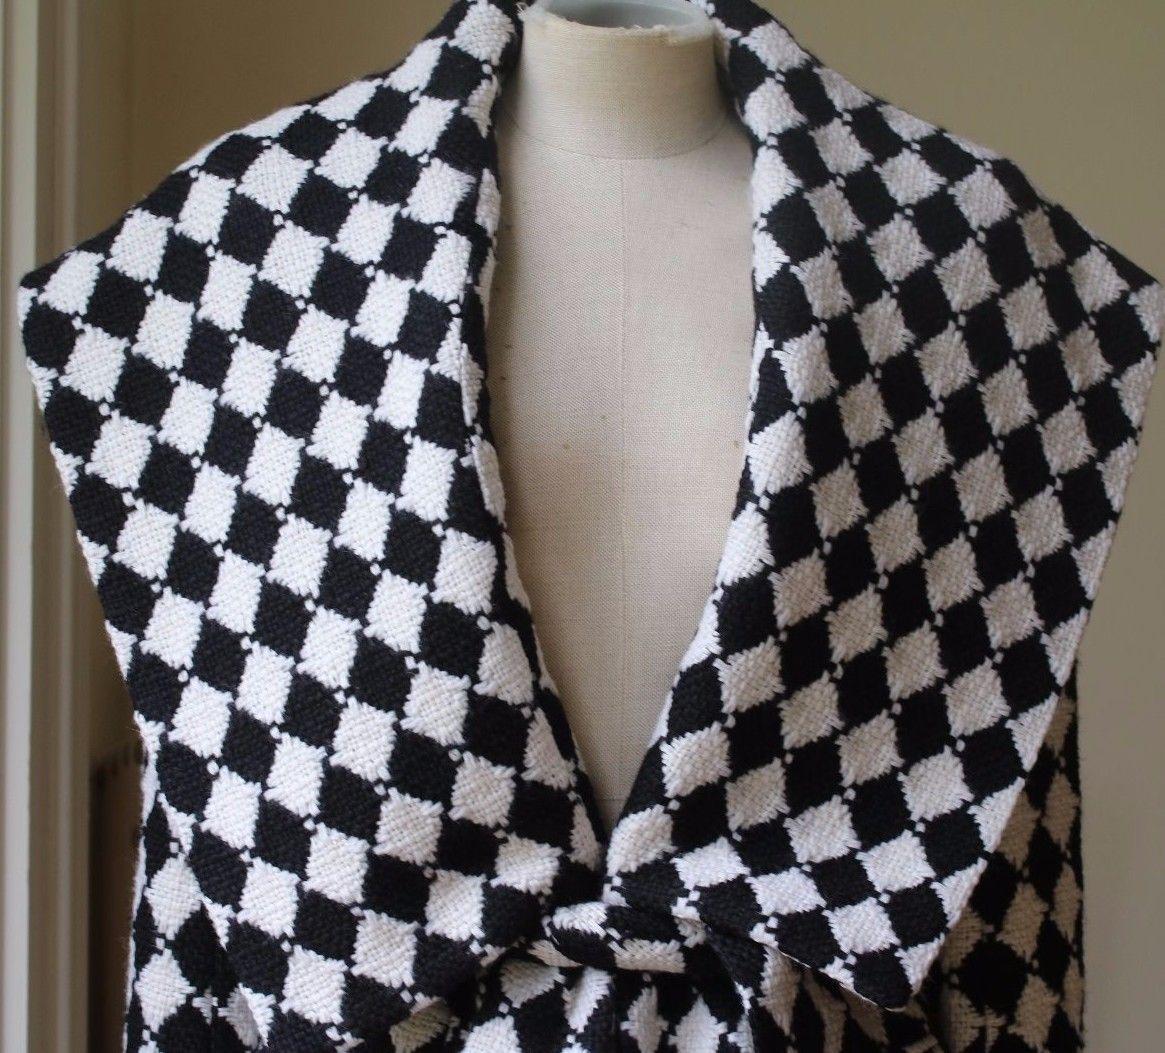 Black and white wool. Concealed hook fastenings through front. 100% wool; lining: 52% viscose, 48% cotton.

Size: FR 38 (UK 10, US 6, IT 42)

Condition: As new condition, no sign of wear. 